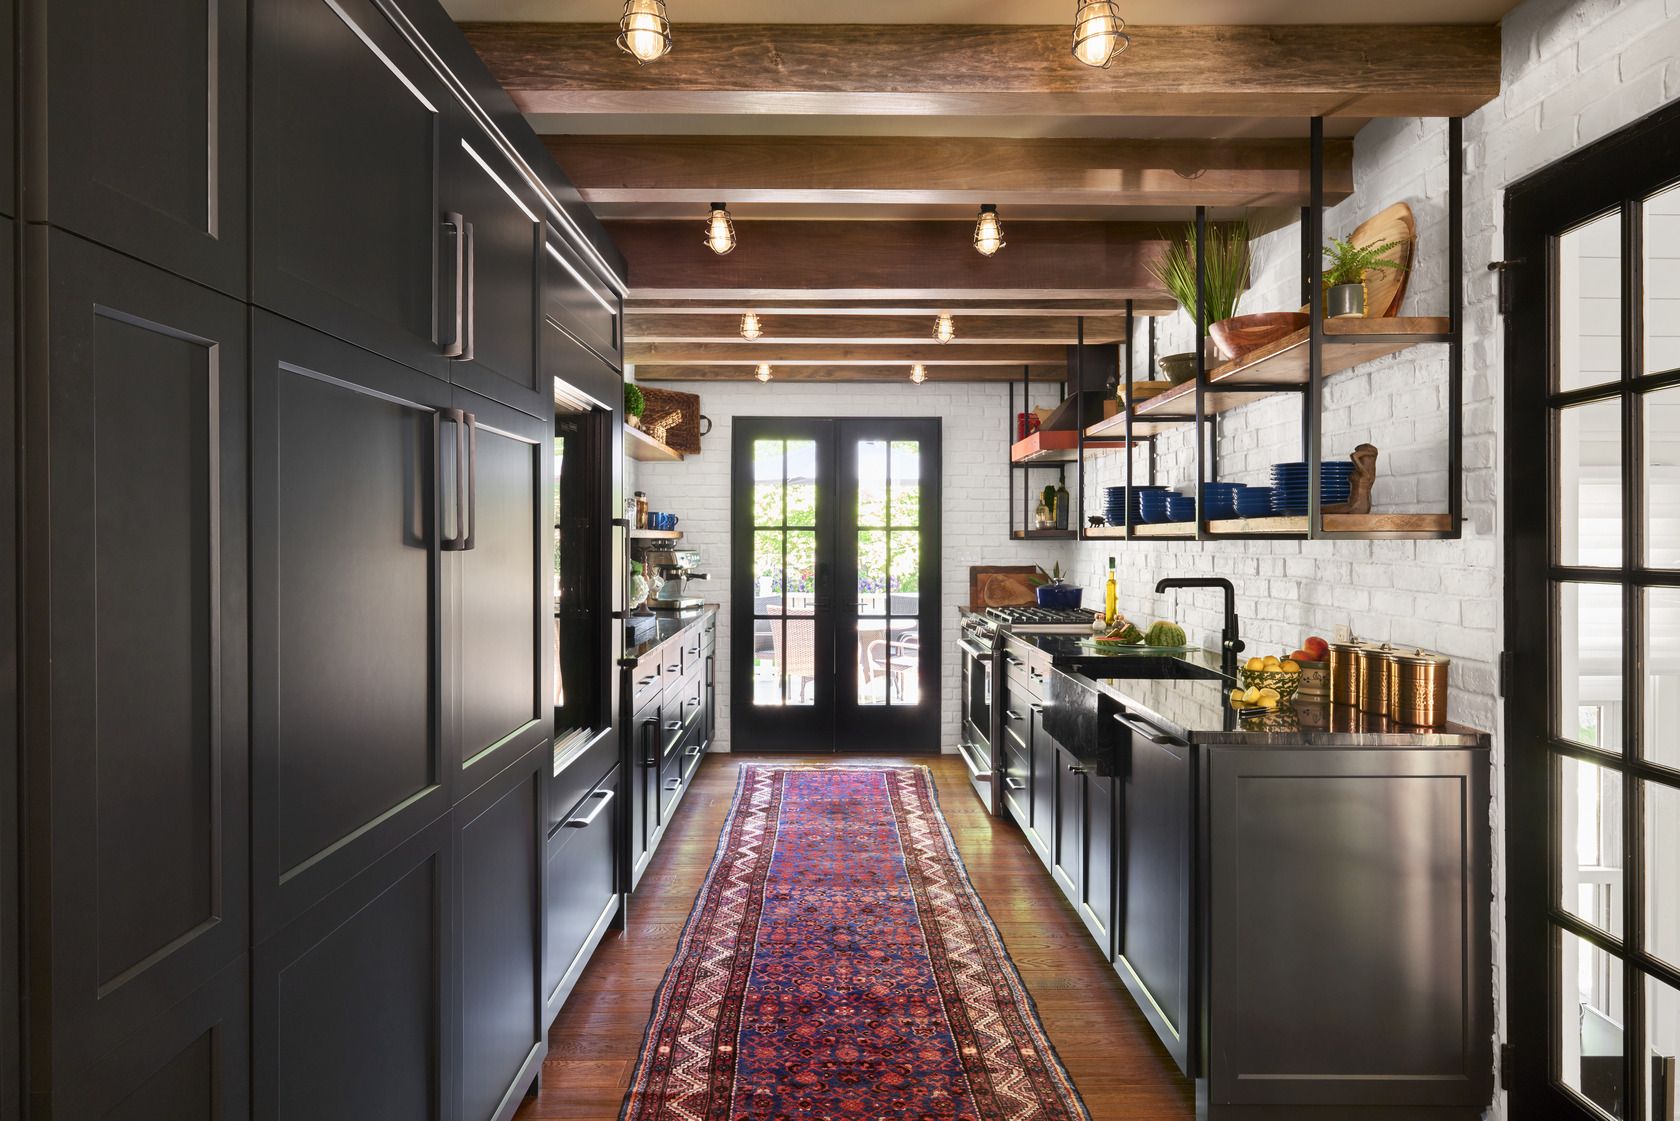 18 Galley Kitchen Design Ideas to Try Right Now